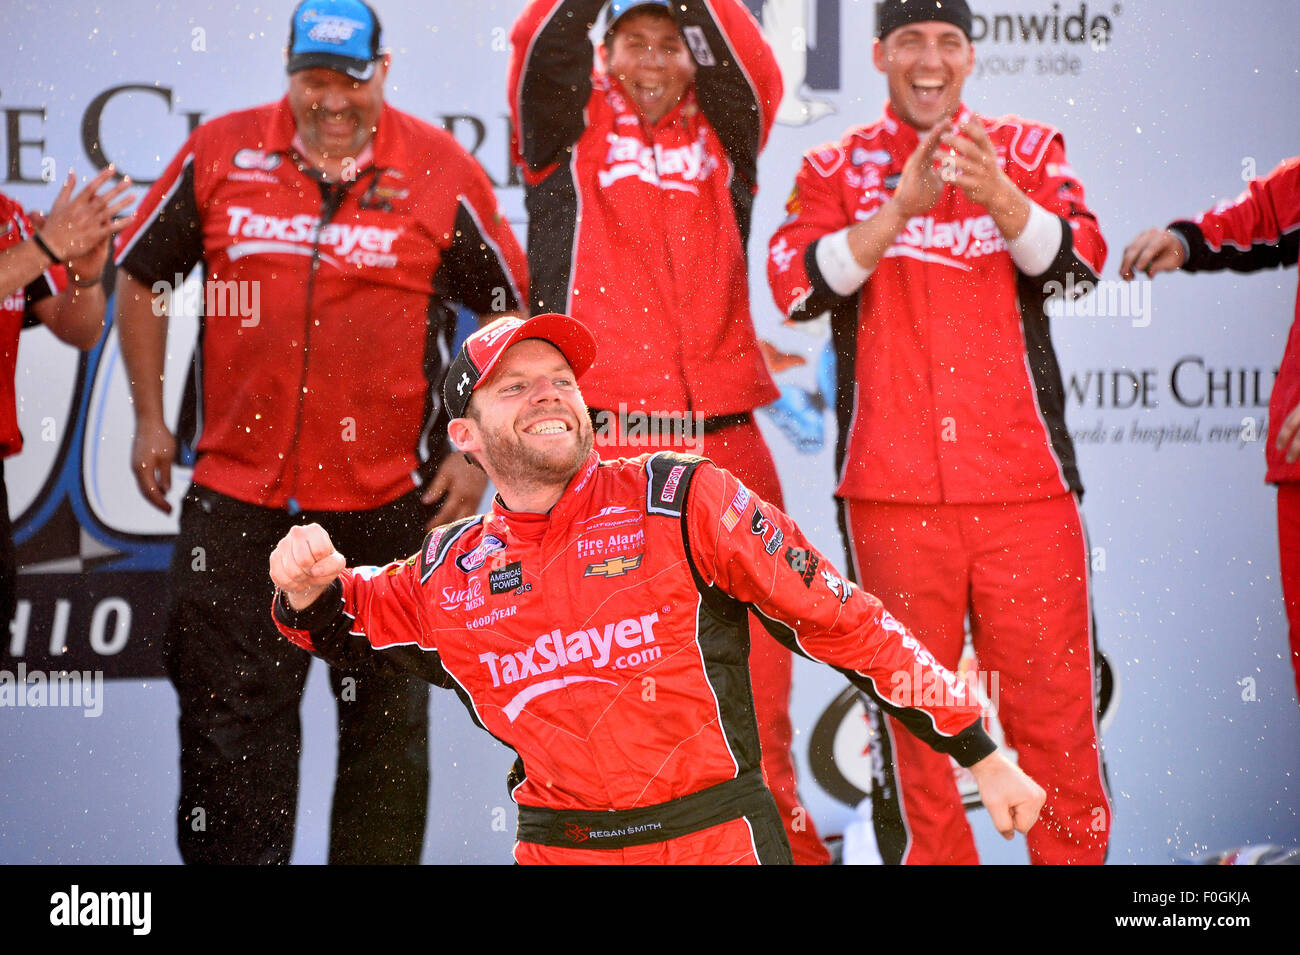 Lexington, OH, USA. 15th Aug, 2015. Lexington, OH - Aug 15, 2015: Regan Smith (7) celebrates in victory lane after winning the Nationwide Children's Hospital 200 at Mid-Ohio Sports Car Course in Lexington, OH. Credit:  csm/Alamy Live News Stock Photo